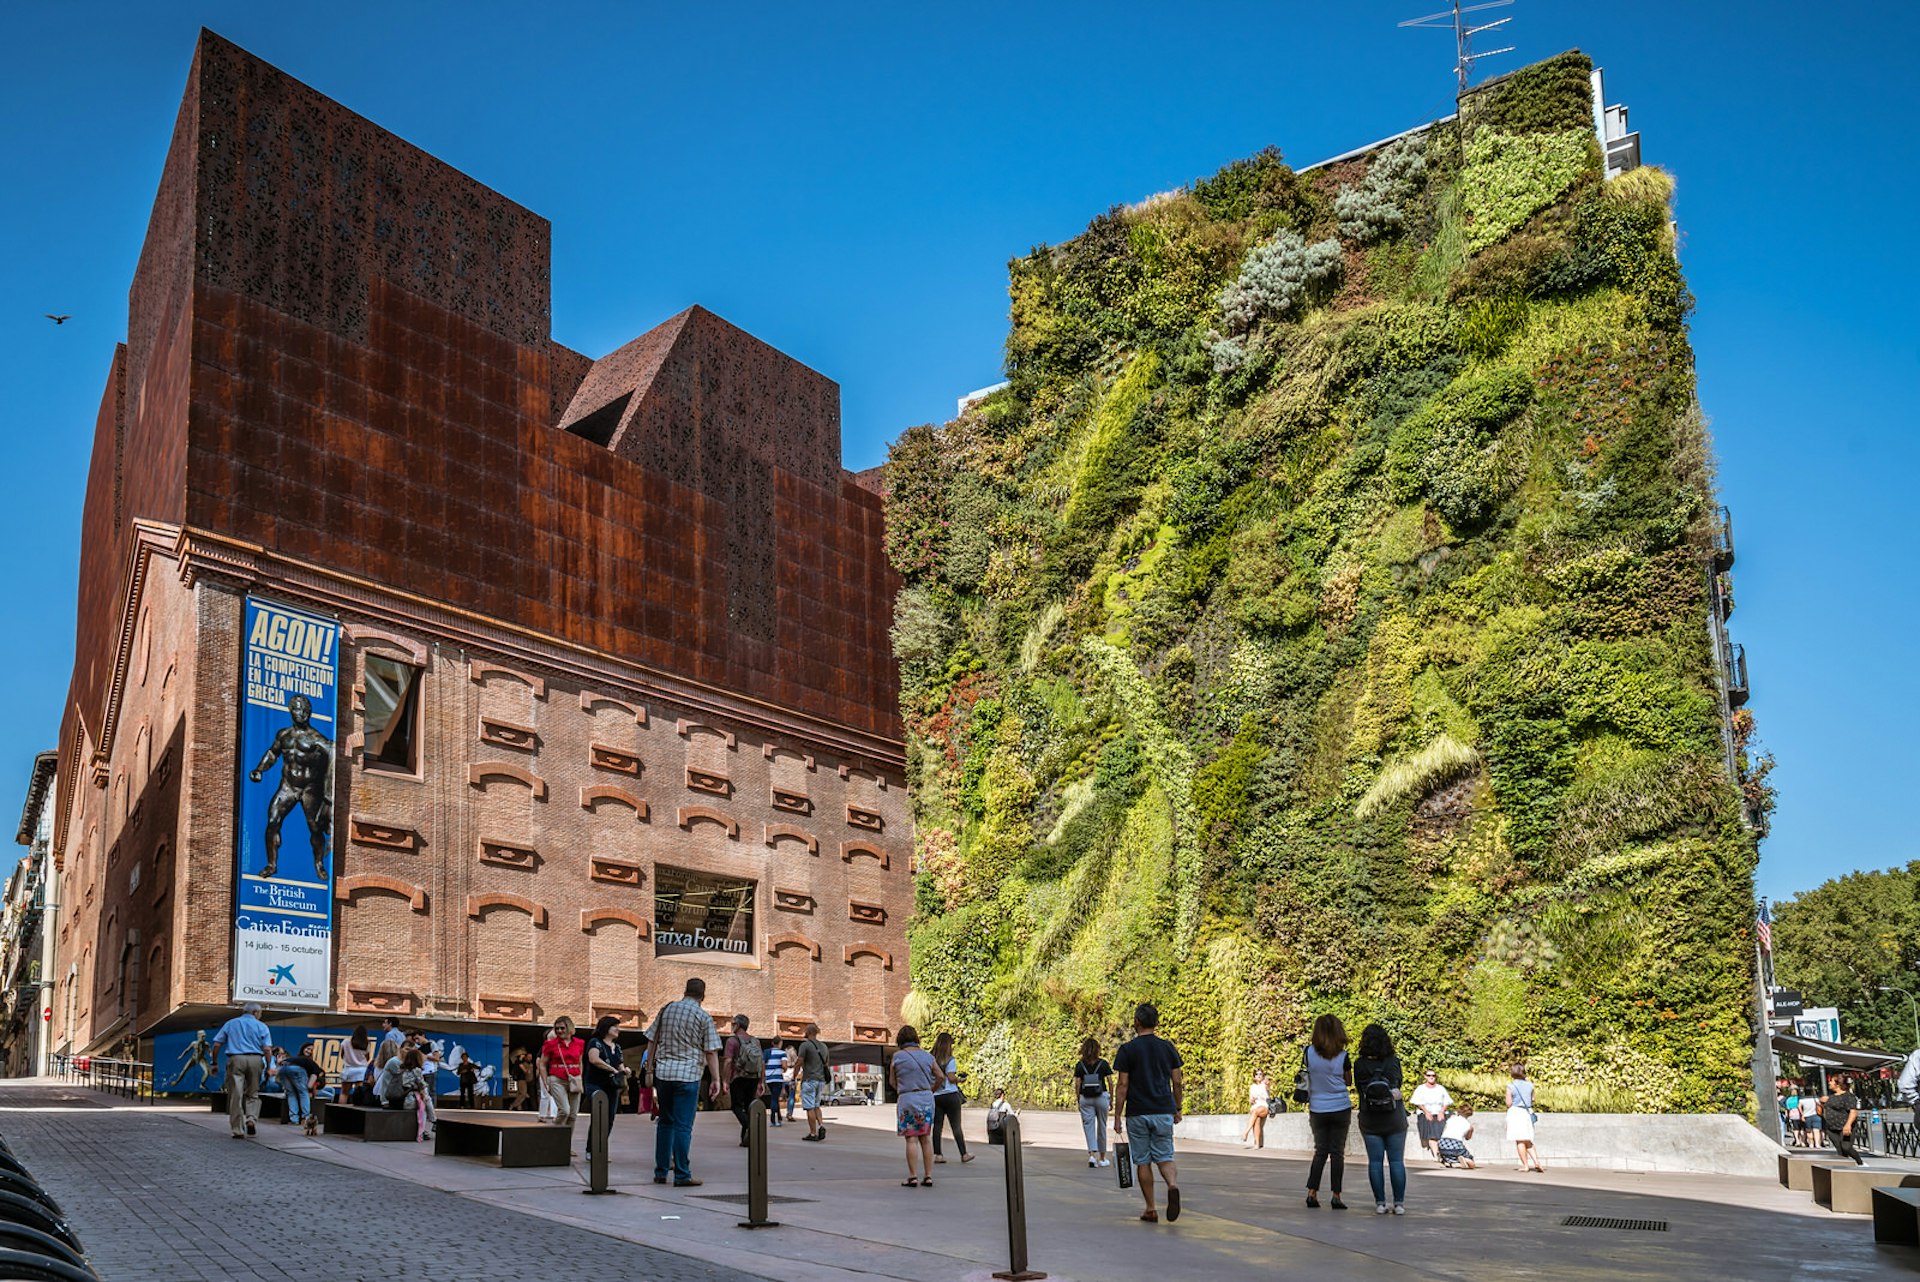 The foliage-clad Caixa Forum is one of Cassandra's favourite arts spaces in Madrid © JJFarq / Shutterstock